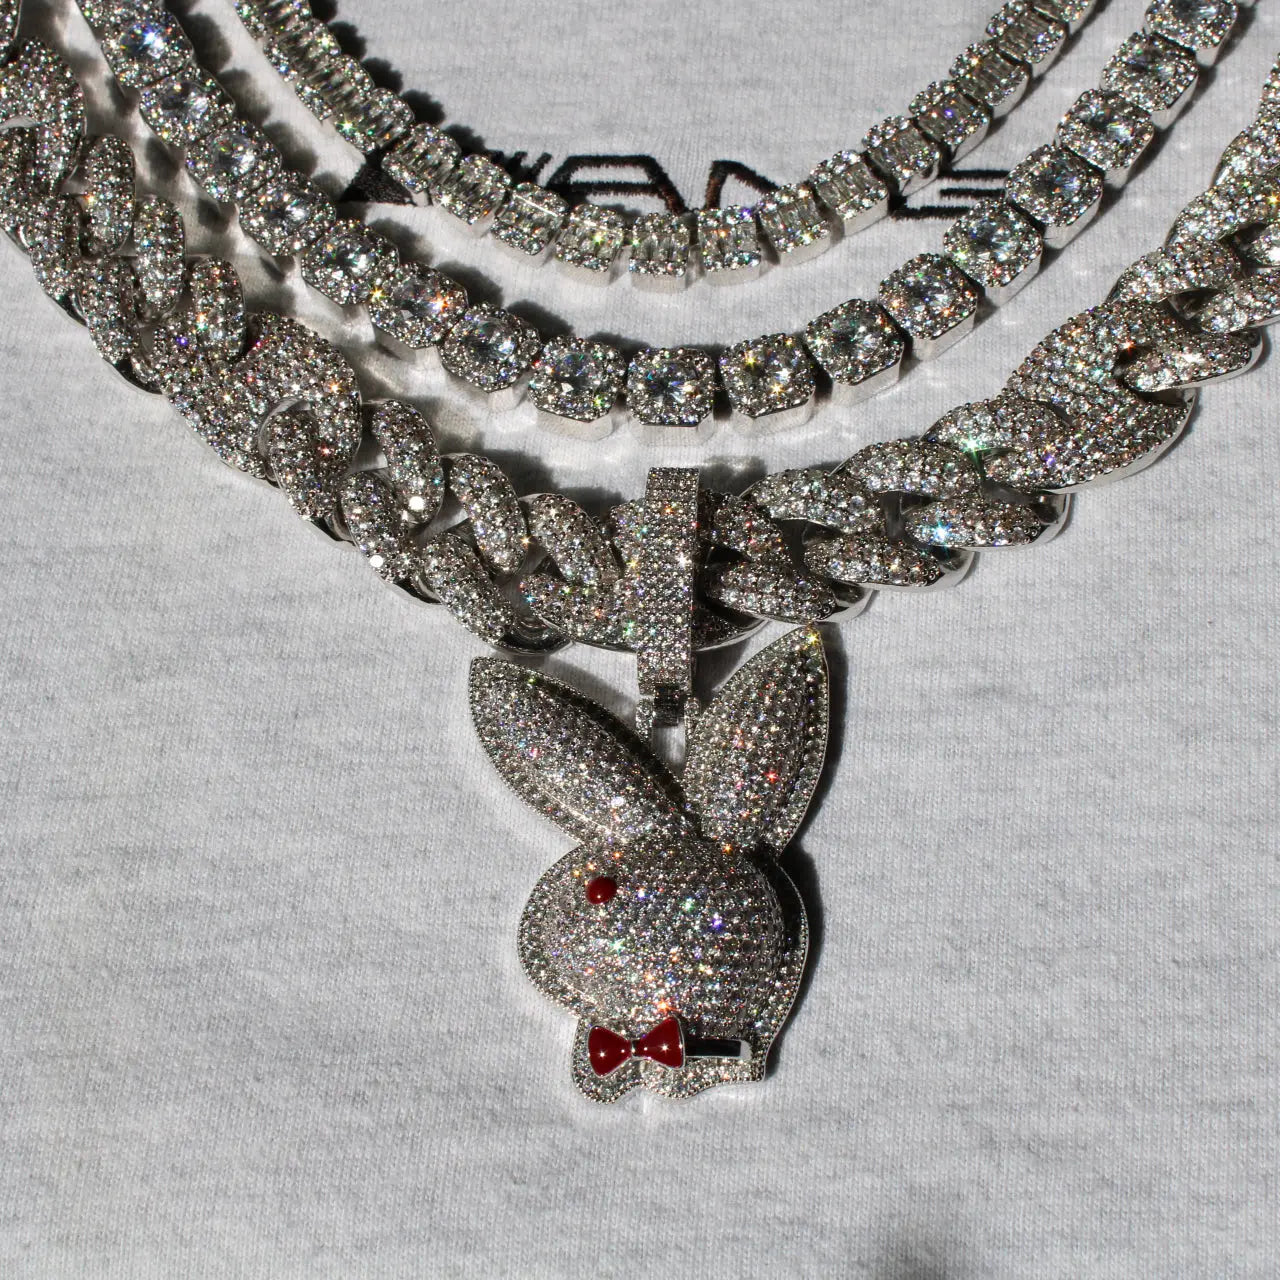 20mm Miami Cuban G-Link Chain in White Gold | - The Icetruck